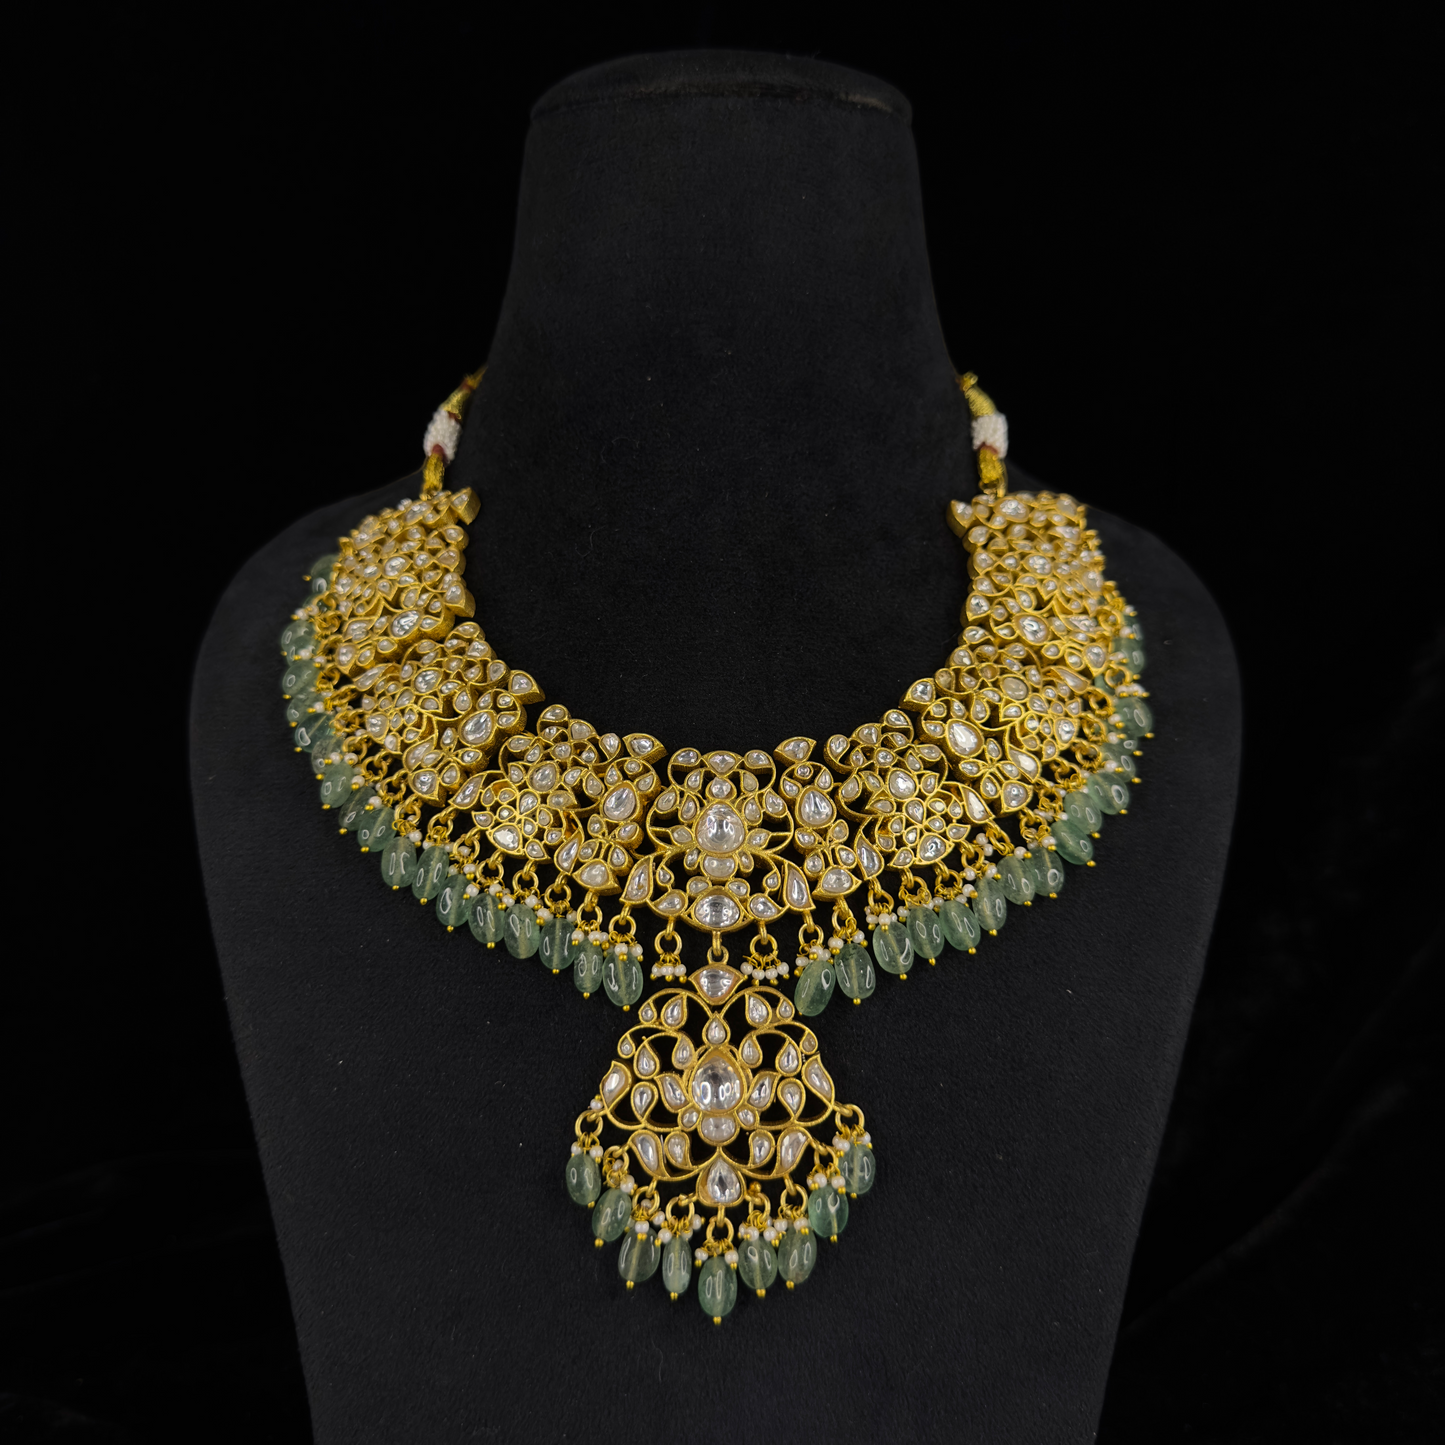 Exquisite Jadau Kundan Bridal Necklace Set with Emerald Bead Drops with 22k Gold plating This product belongs to Jadau Kundan jewellery category 